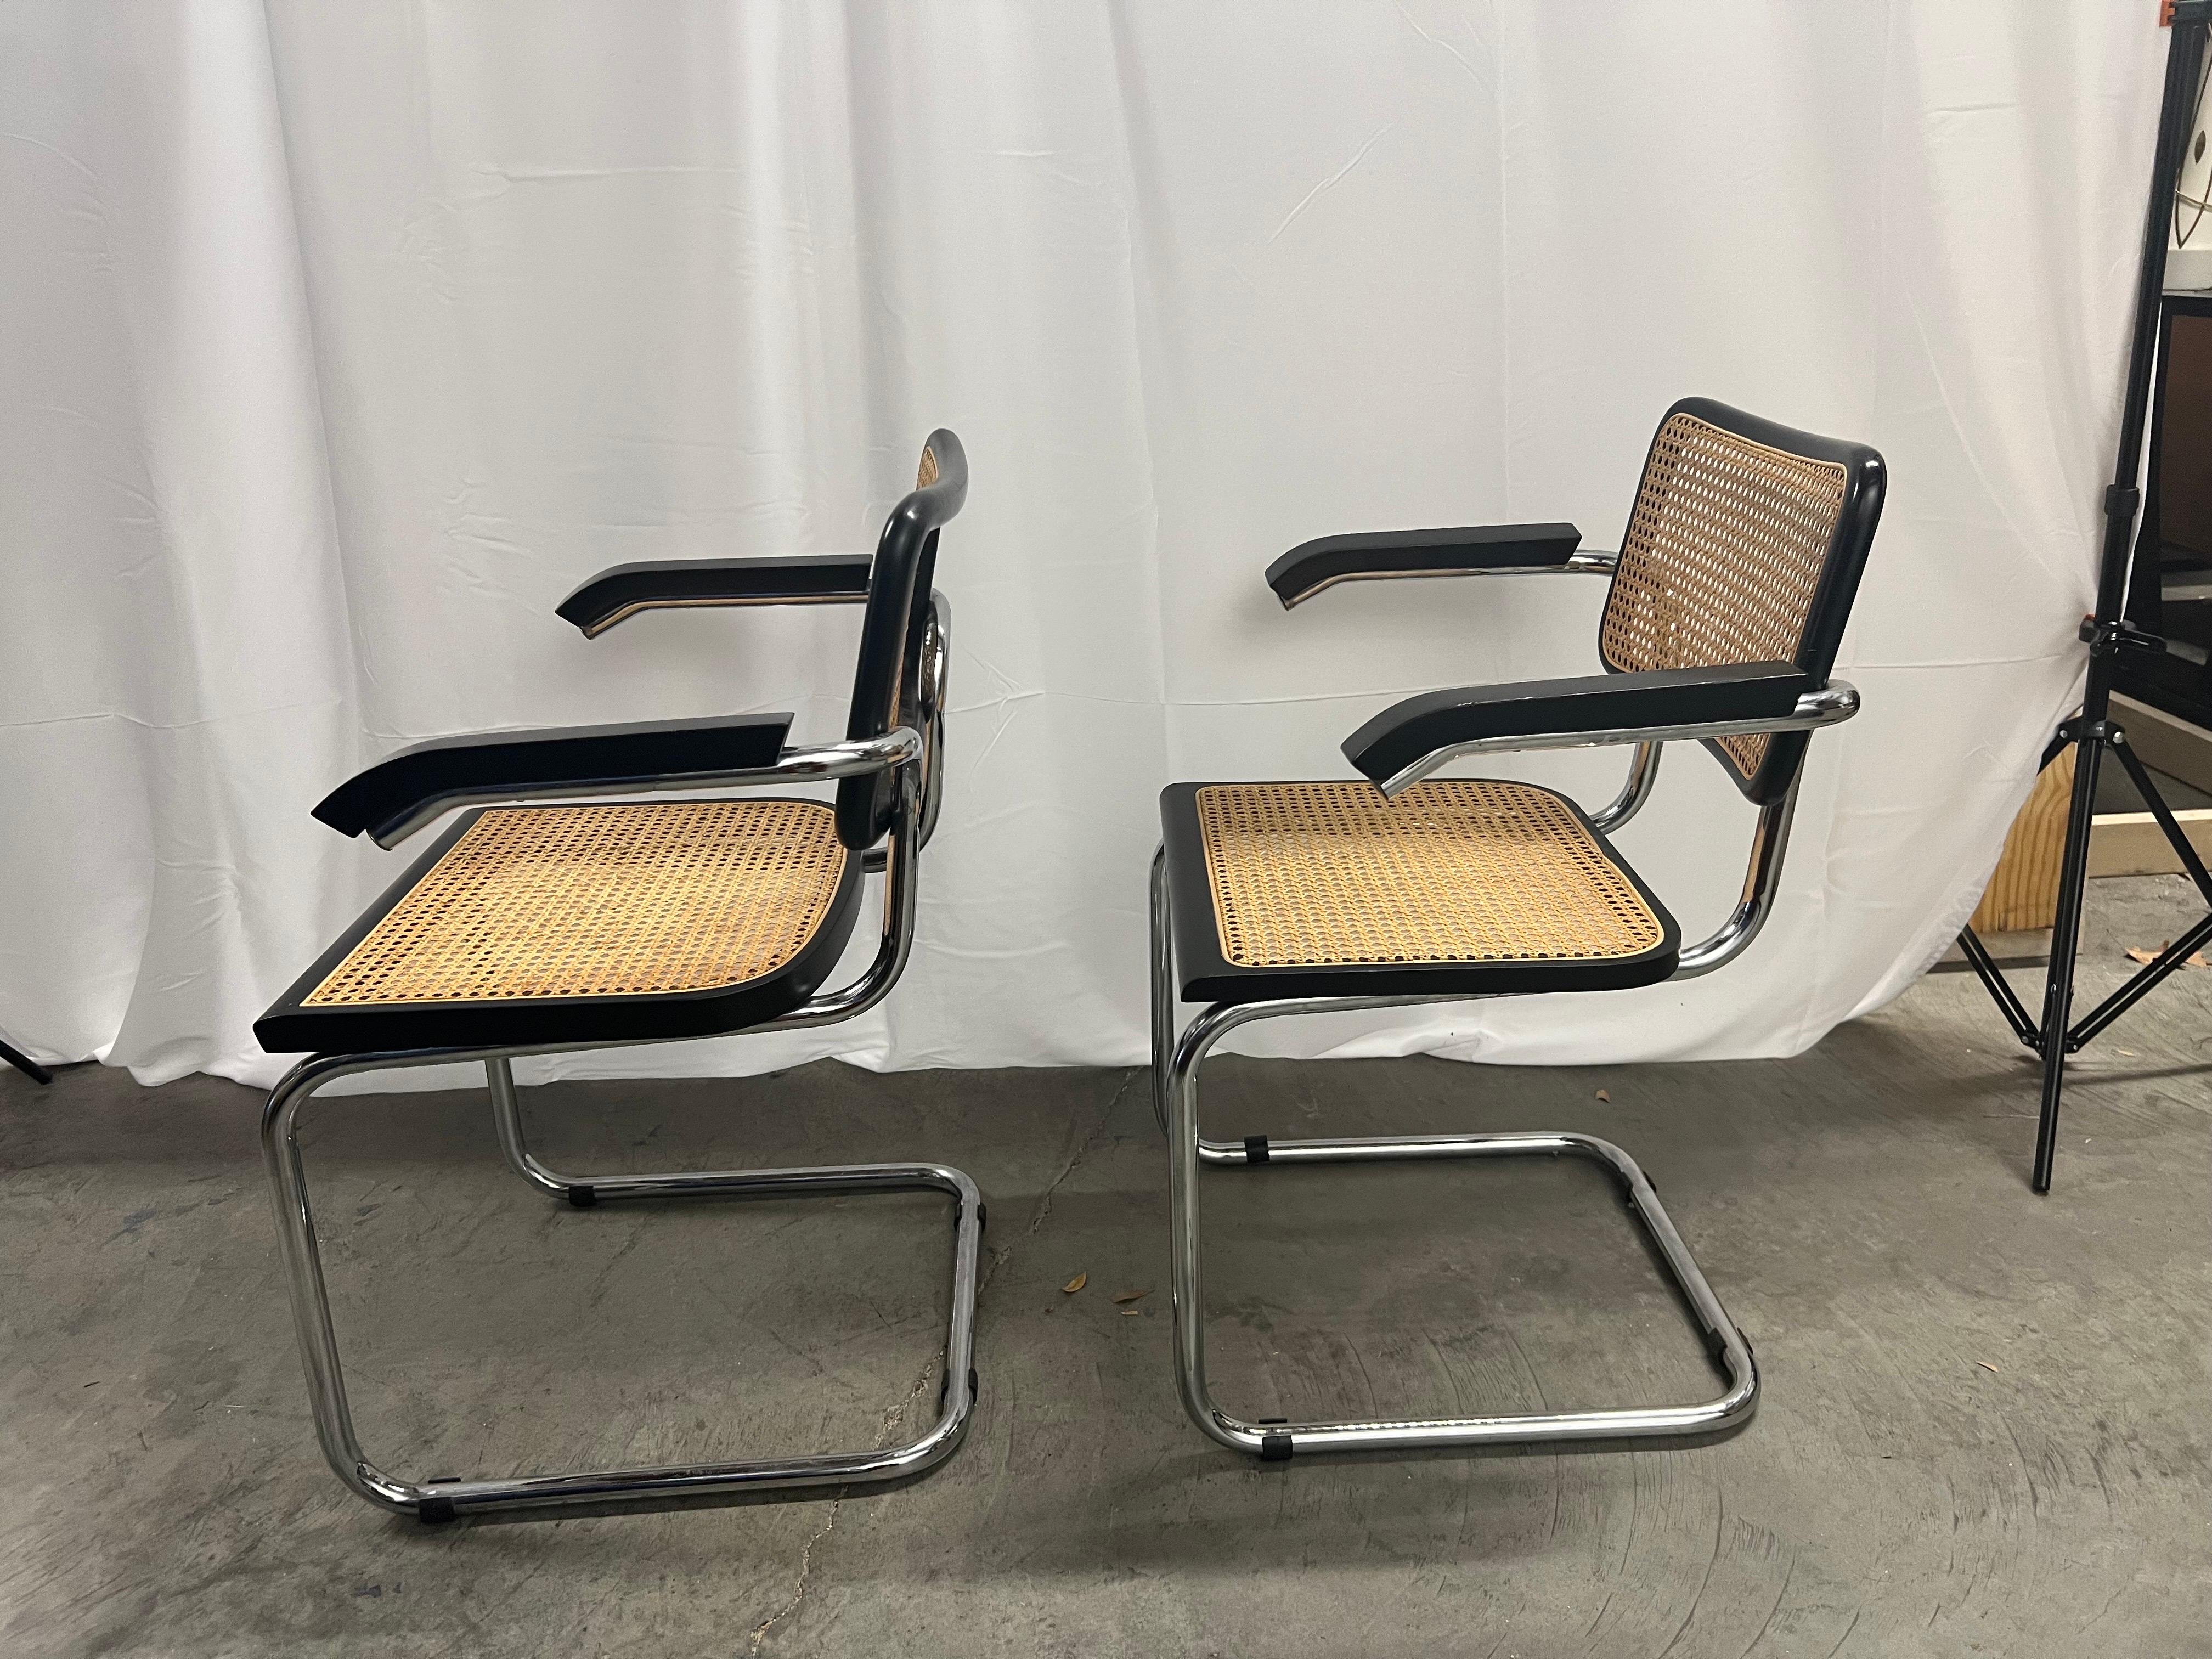 Bahaus Marcel Breuer Cesca Chair S64  In Good Condition For Sale In Charleston, SC